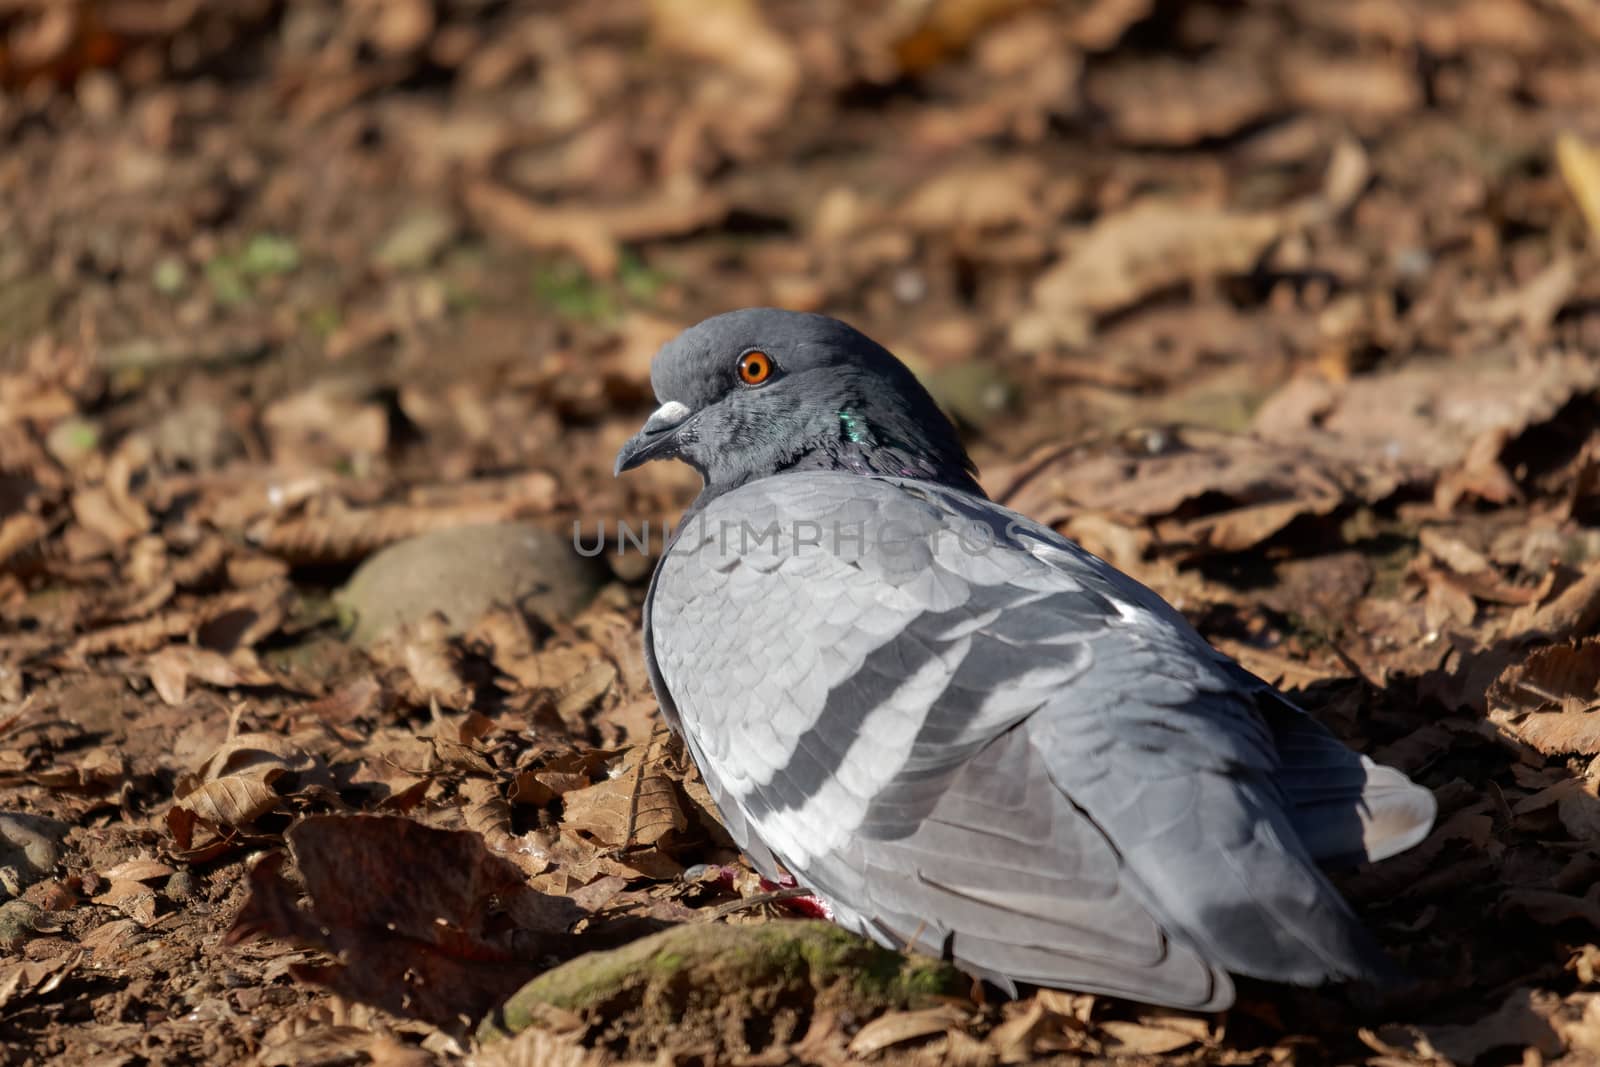 Pigeon basking in the sun in the Parco di Monza